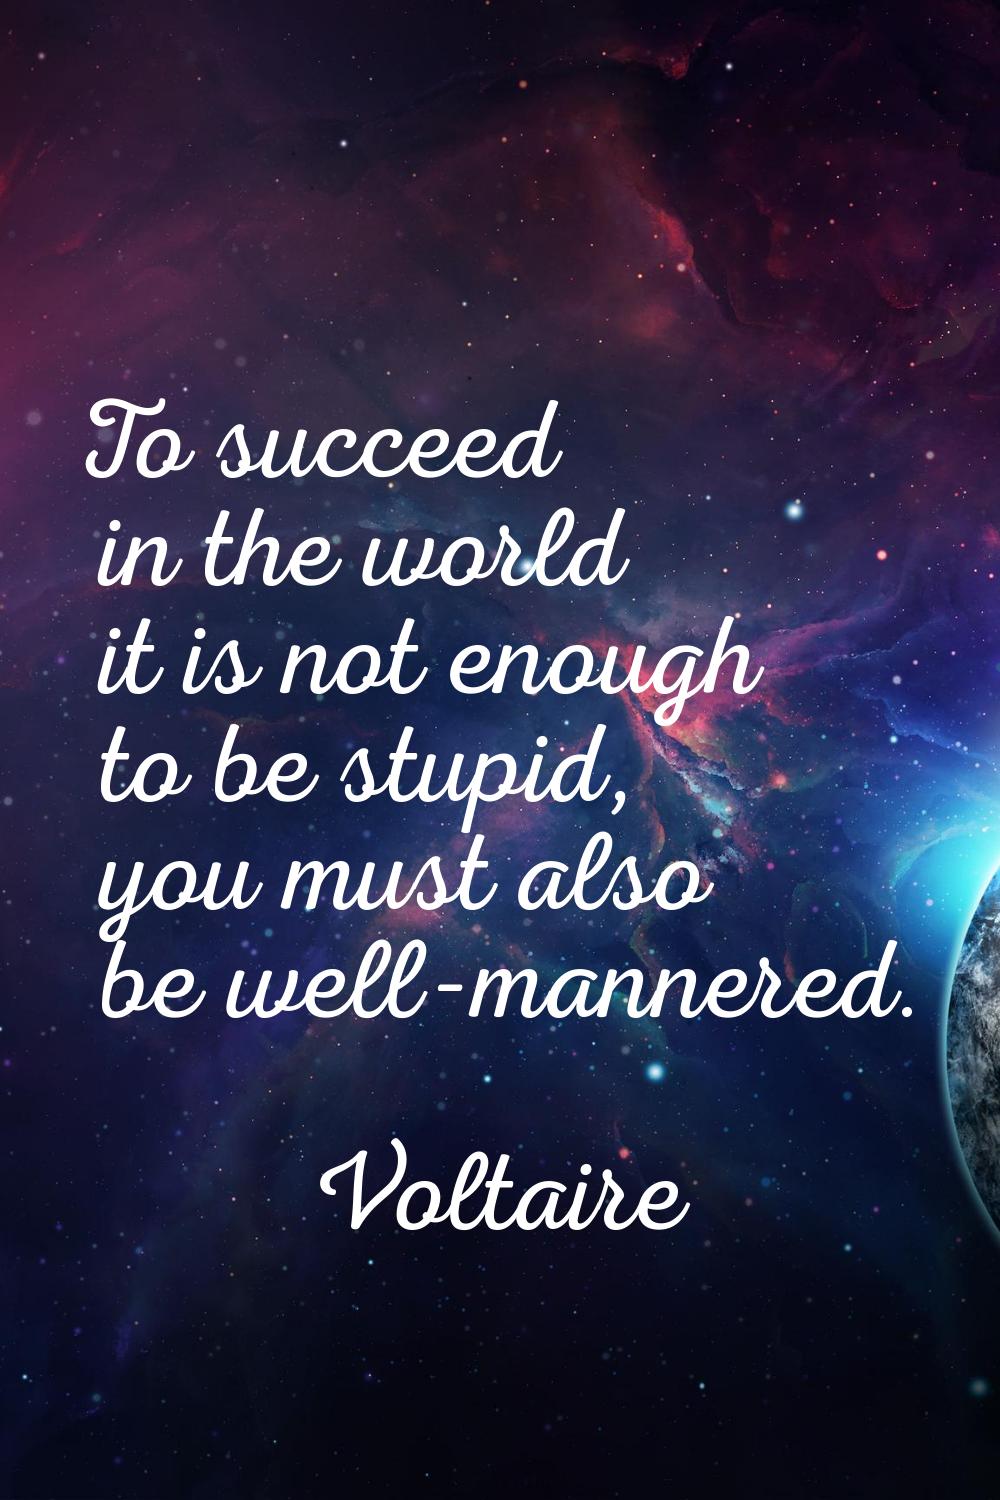 To succeed in the world it is not enough to be stupid, you must also be well-mannered.